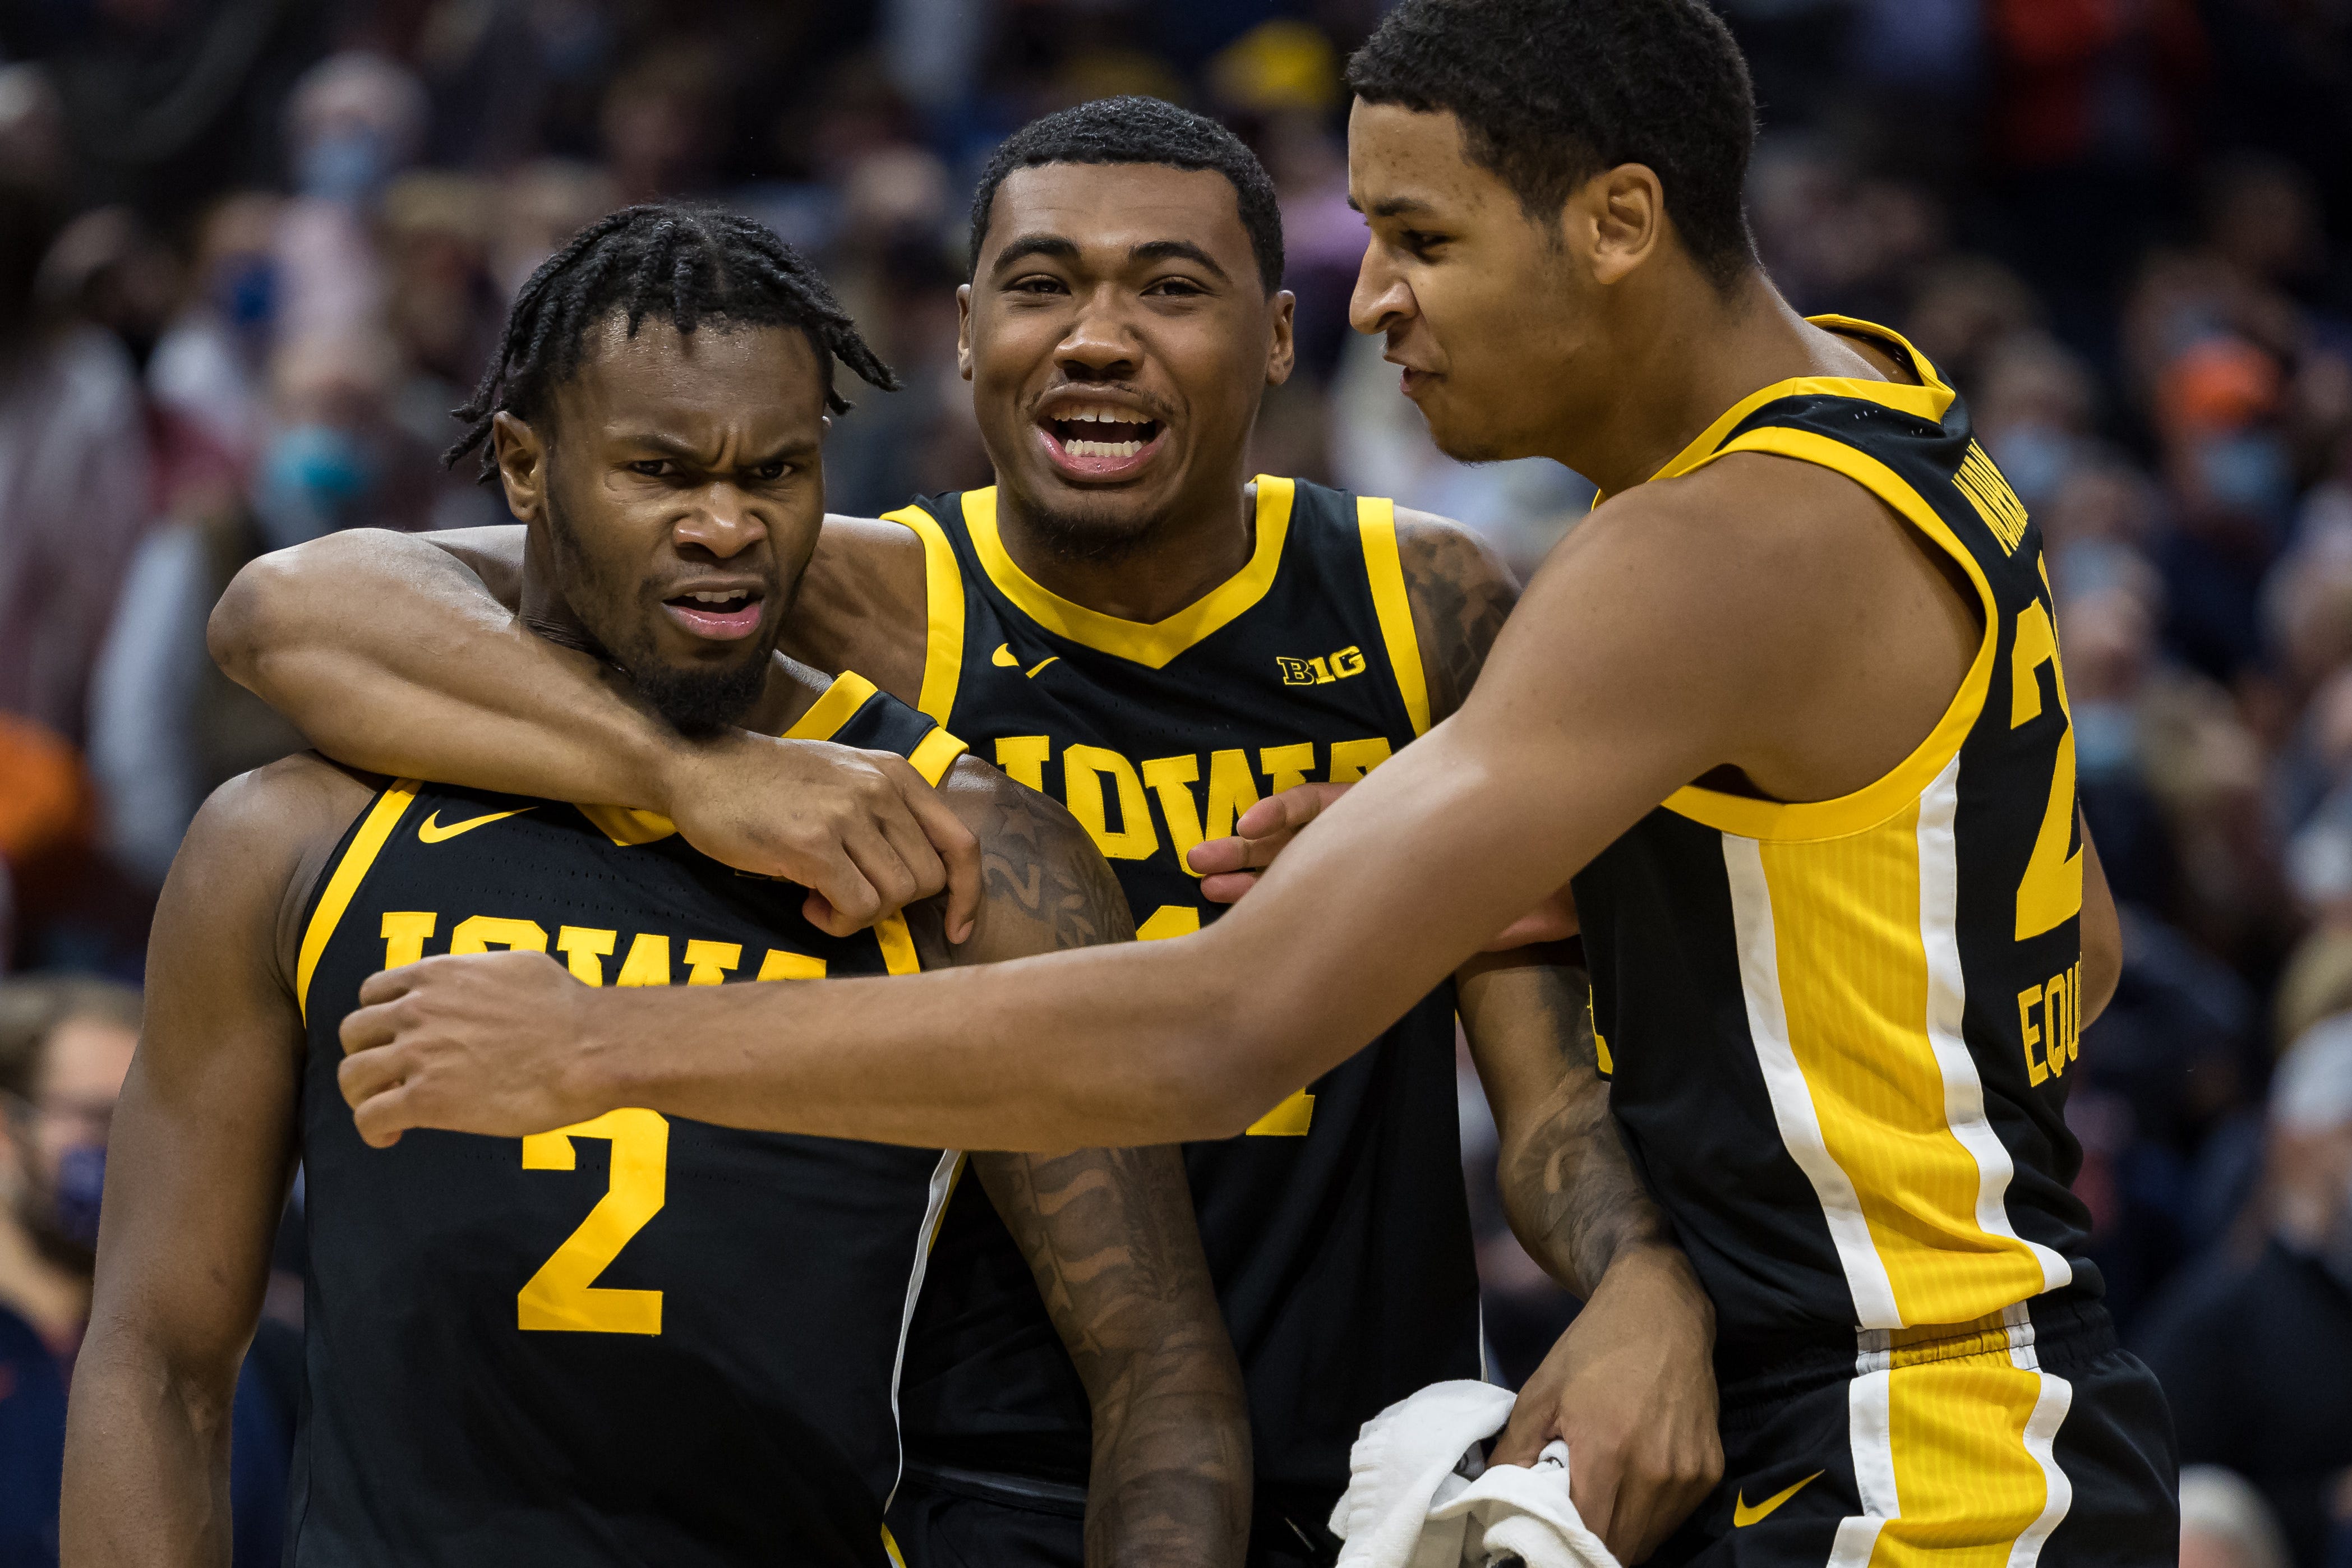 Iowa Hawkeyes guard Joe Toussaint (2) celebrates with guard Tony Perkins (11) and forward Kris Murray (24) after the game against the Virginia Cavaliers, Monday, Nov. 29, 2021, at John Paul Jones Arena in Charlottesville, Va.